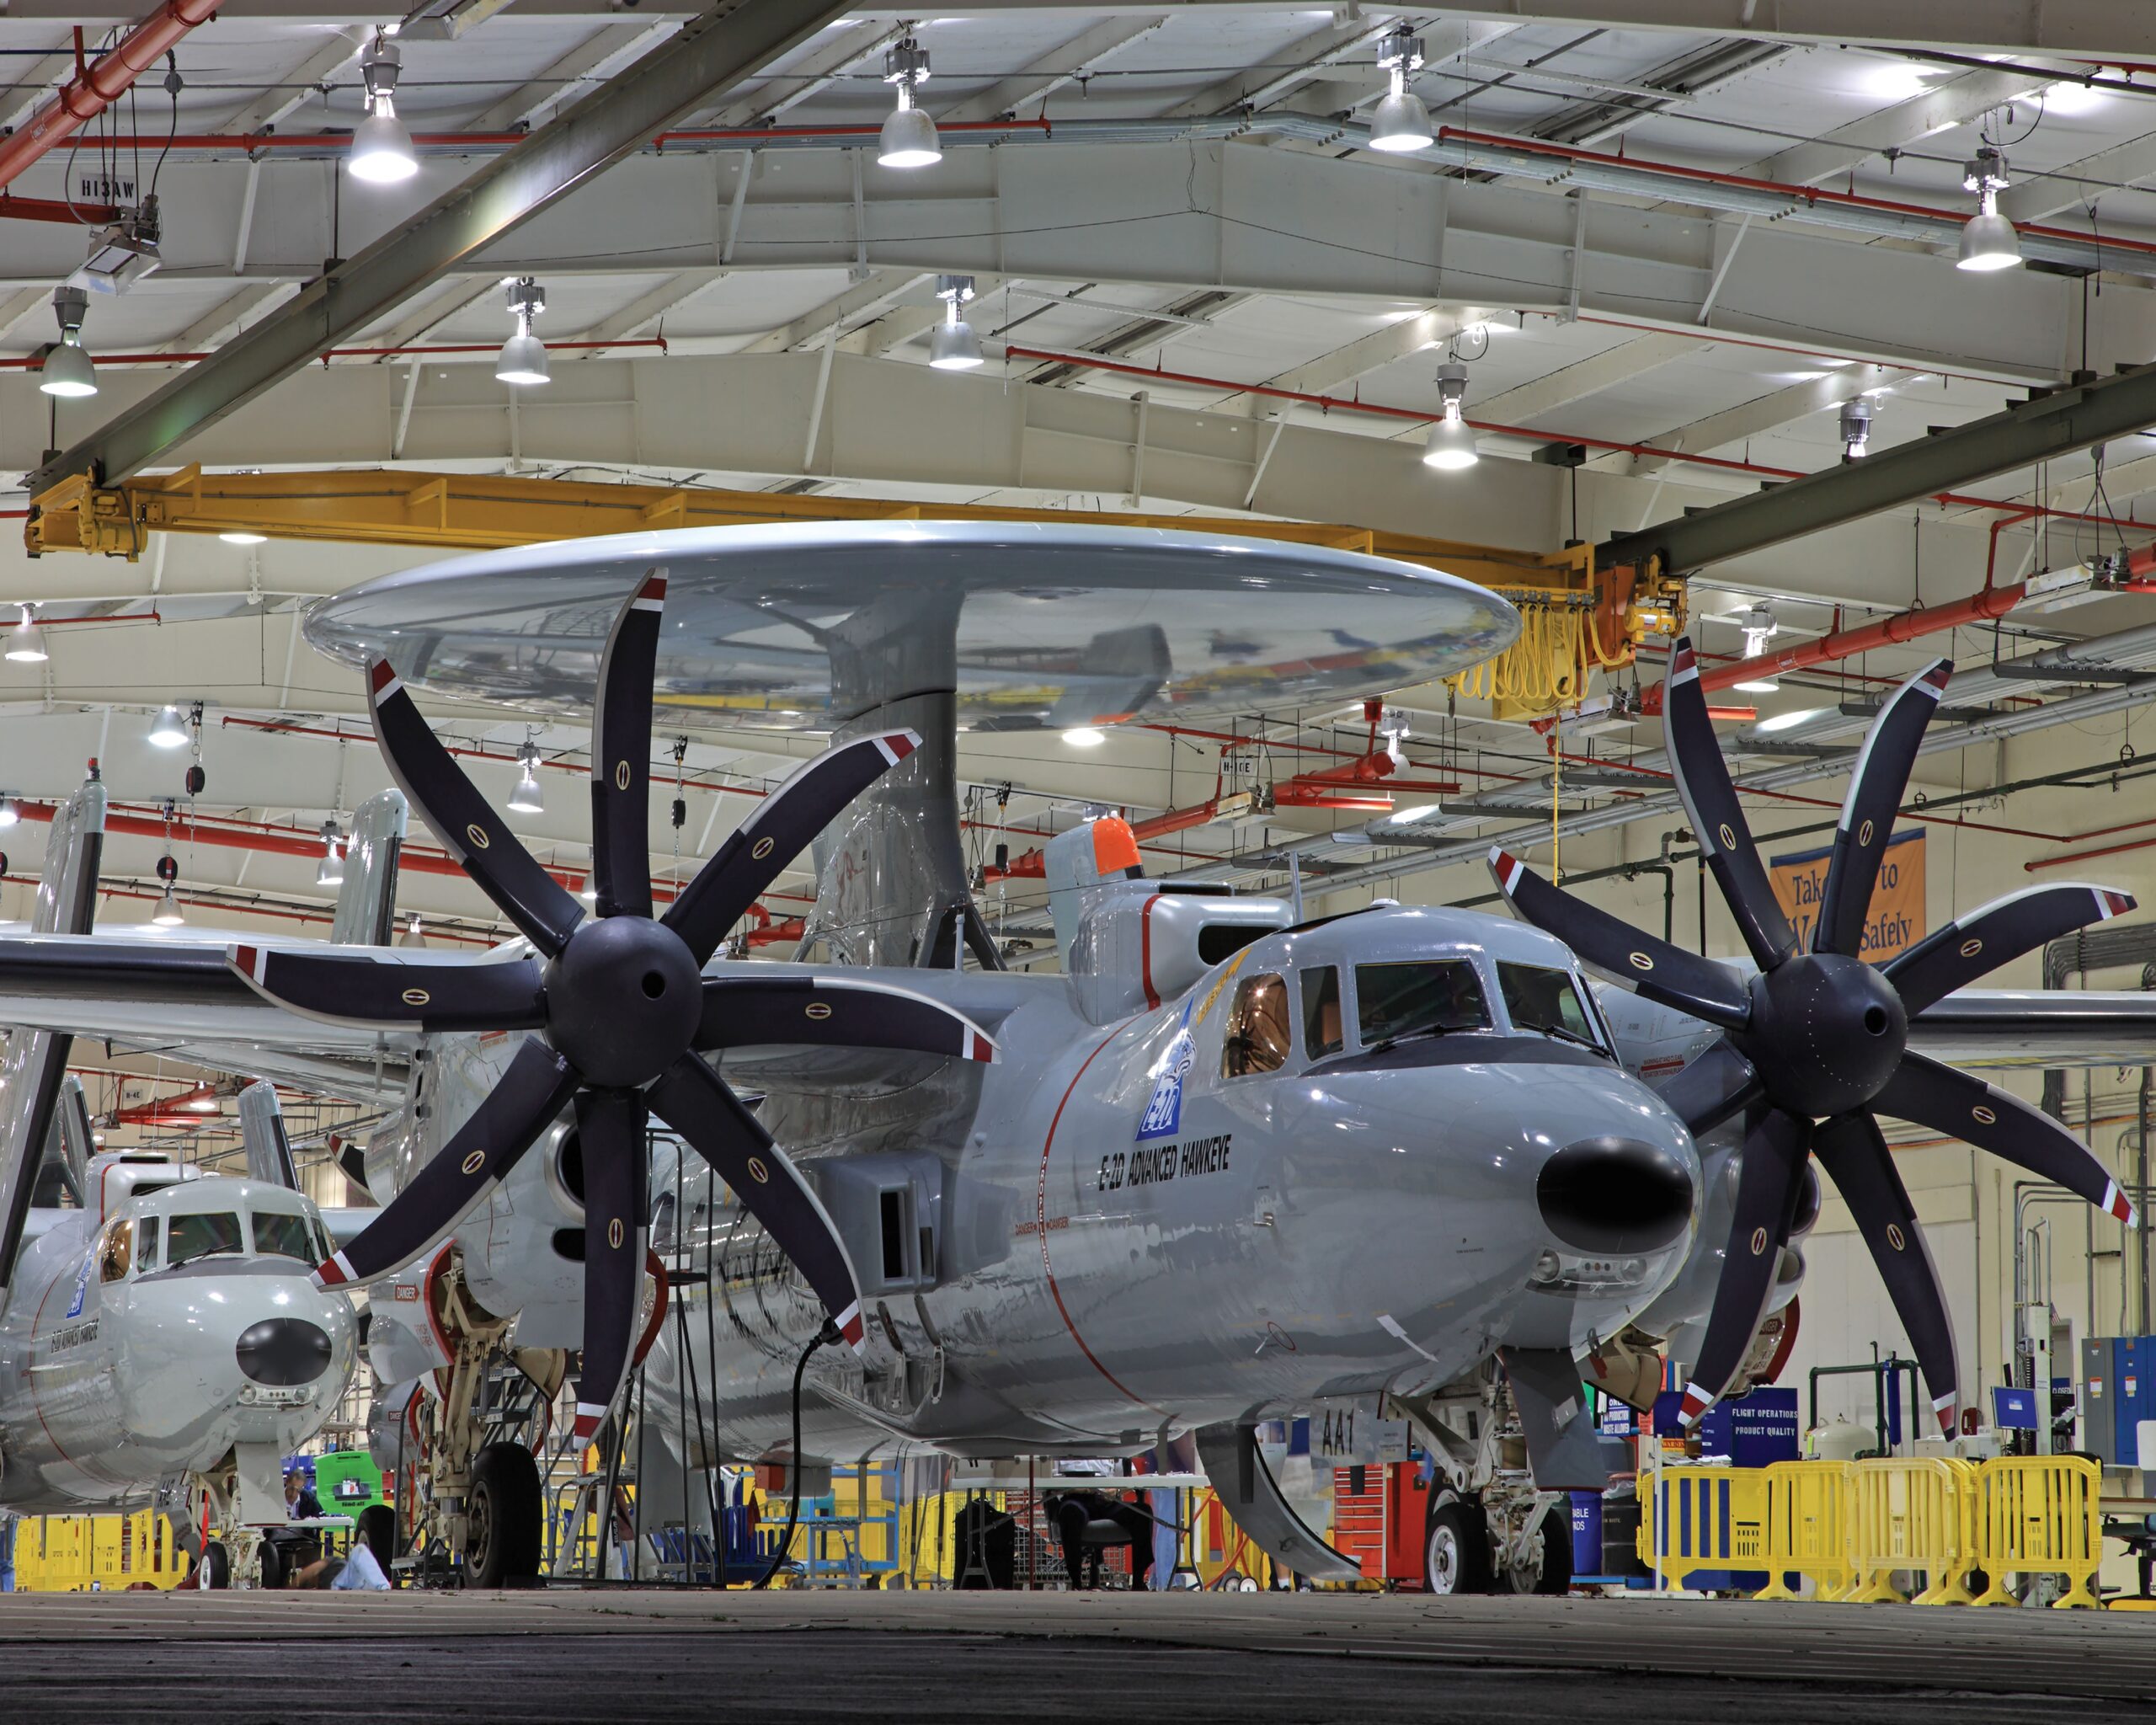 The international launch customer for the E-2D Advanced Hawkeye was Japan, and Northrop Grumman is about to go under contract with France for three aircraft.